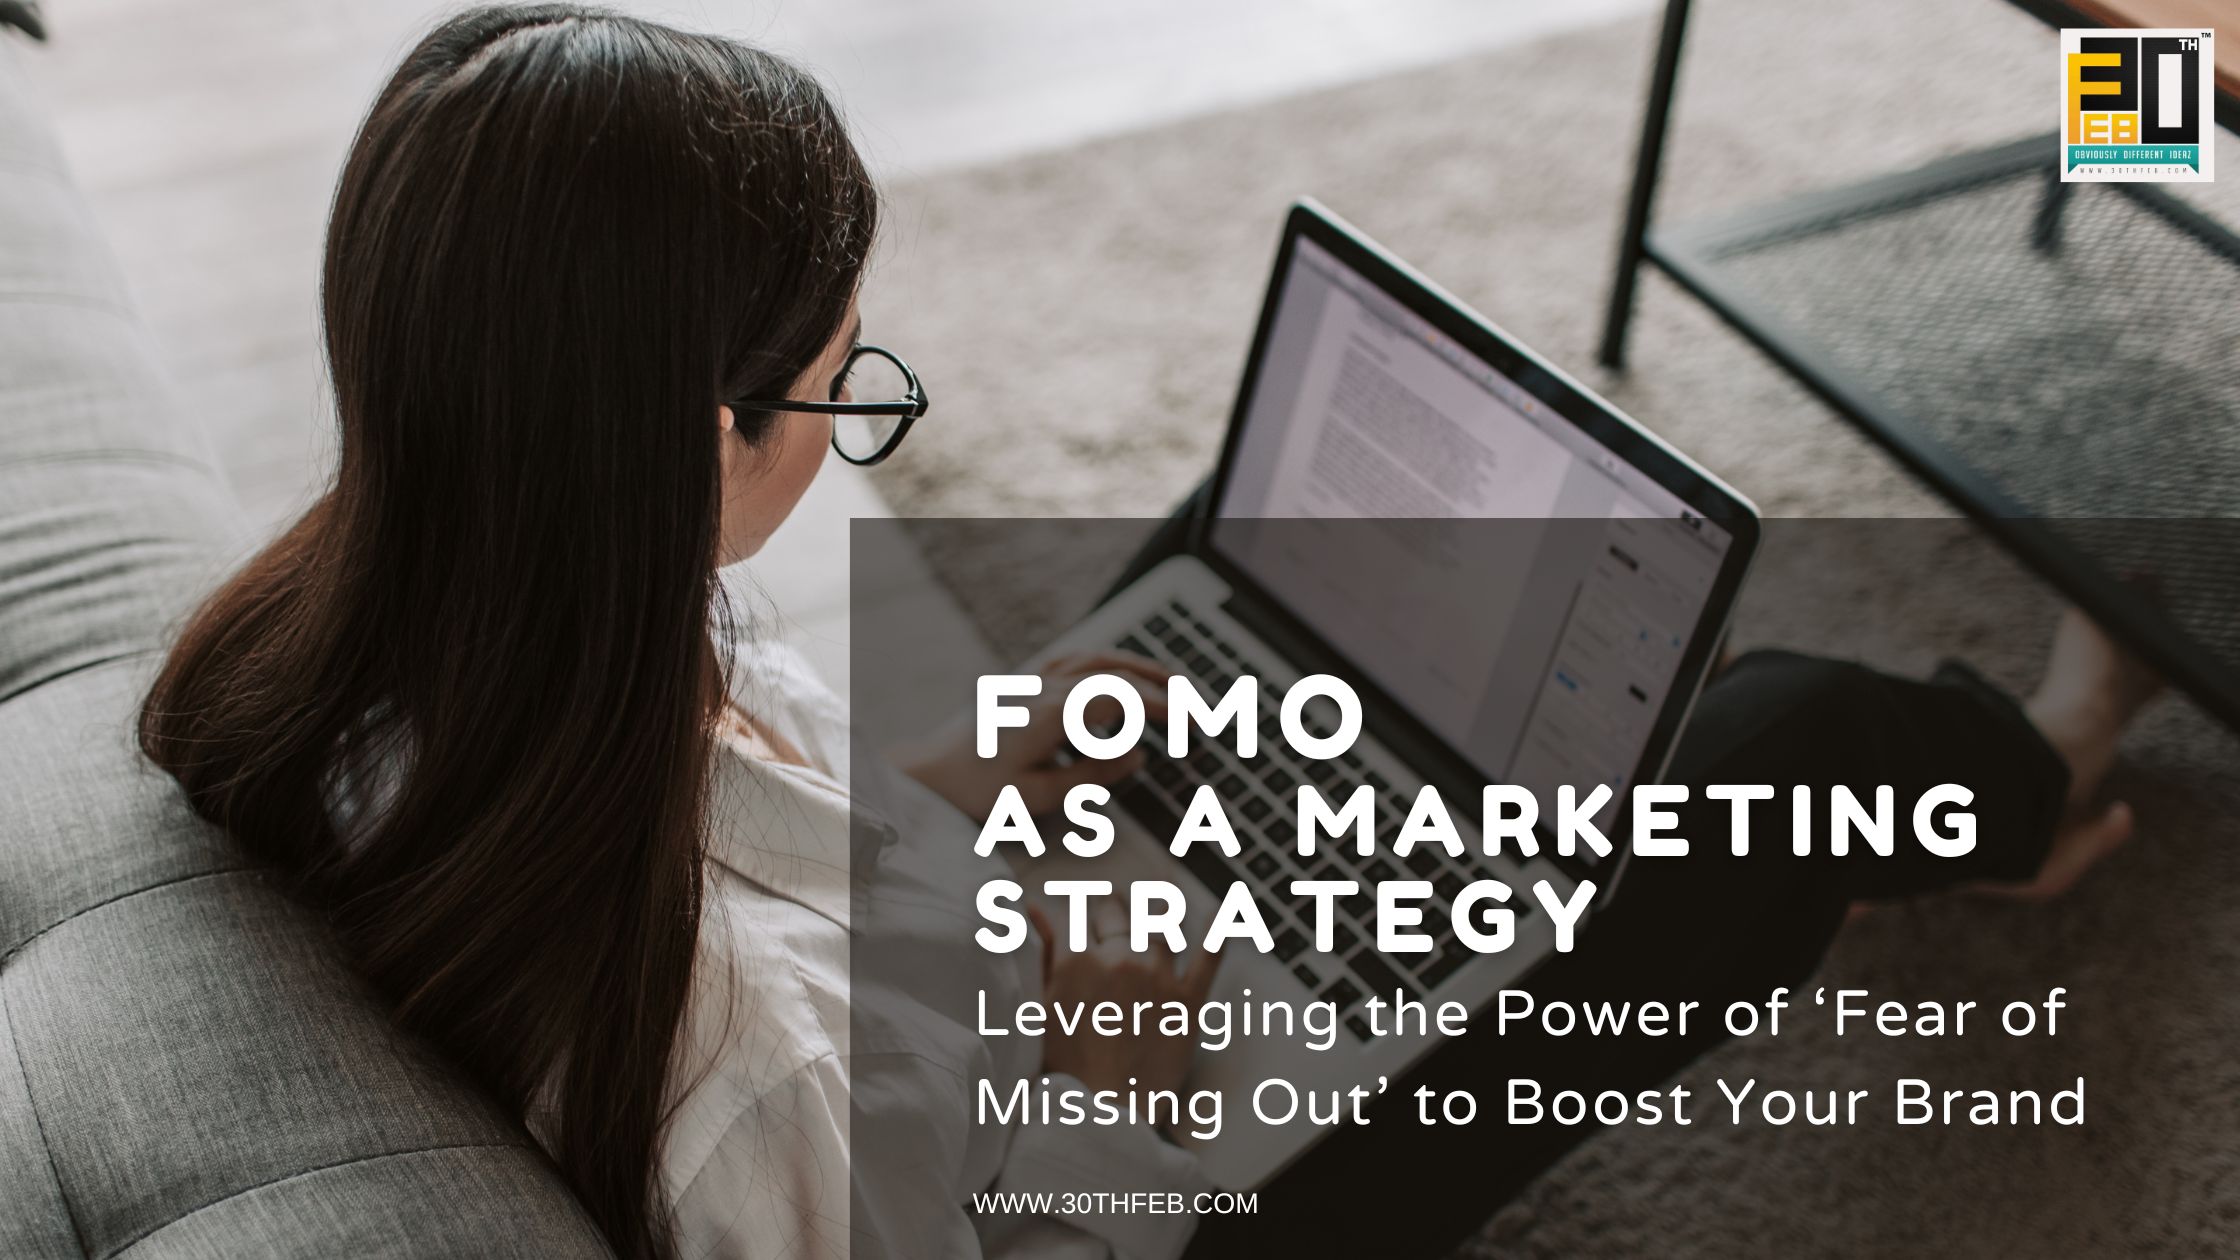 FOMO as a Marketing Strategy: Leveraging the Power of ‘Fear of Missing Out’ to Boost Your Brand